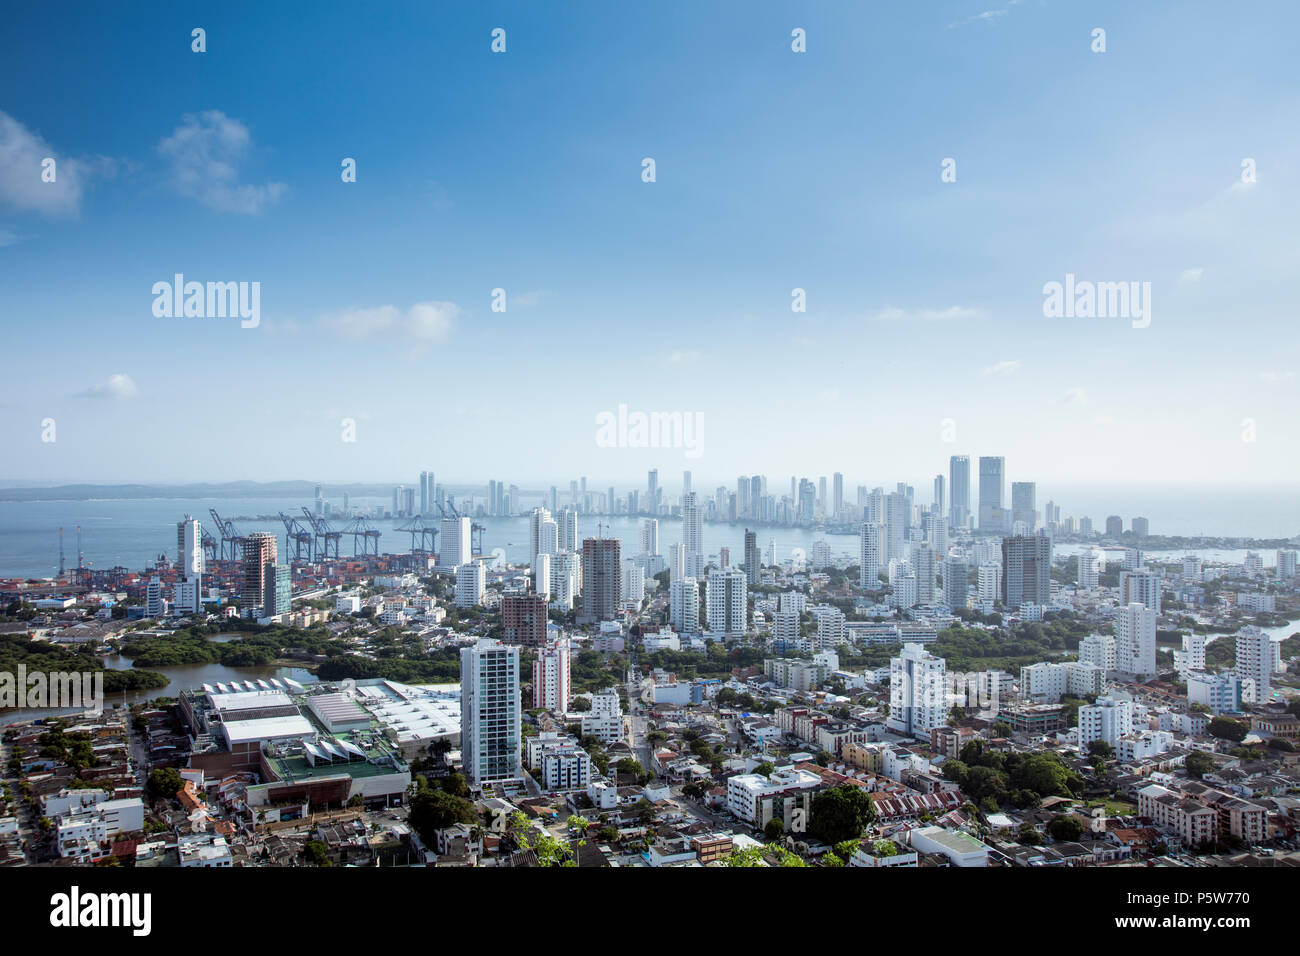 The skyline of the upmarket Bocagrande neighbourhood in central Cartagena on the Caribbean coast of Colombia, South America Stock Photo